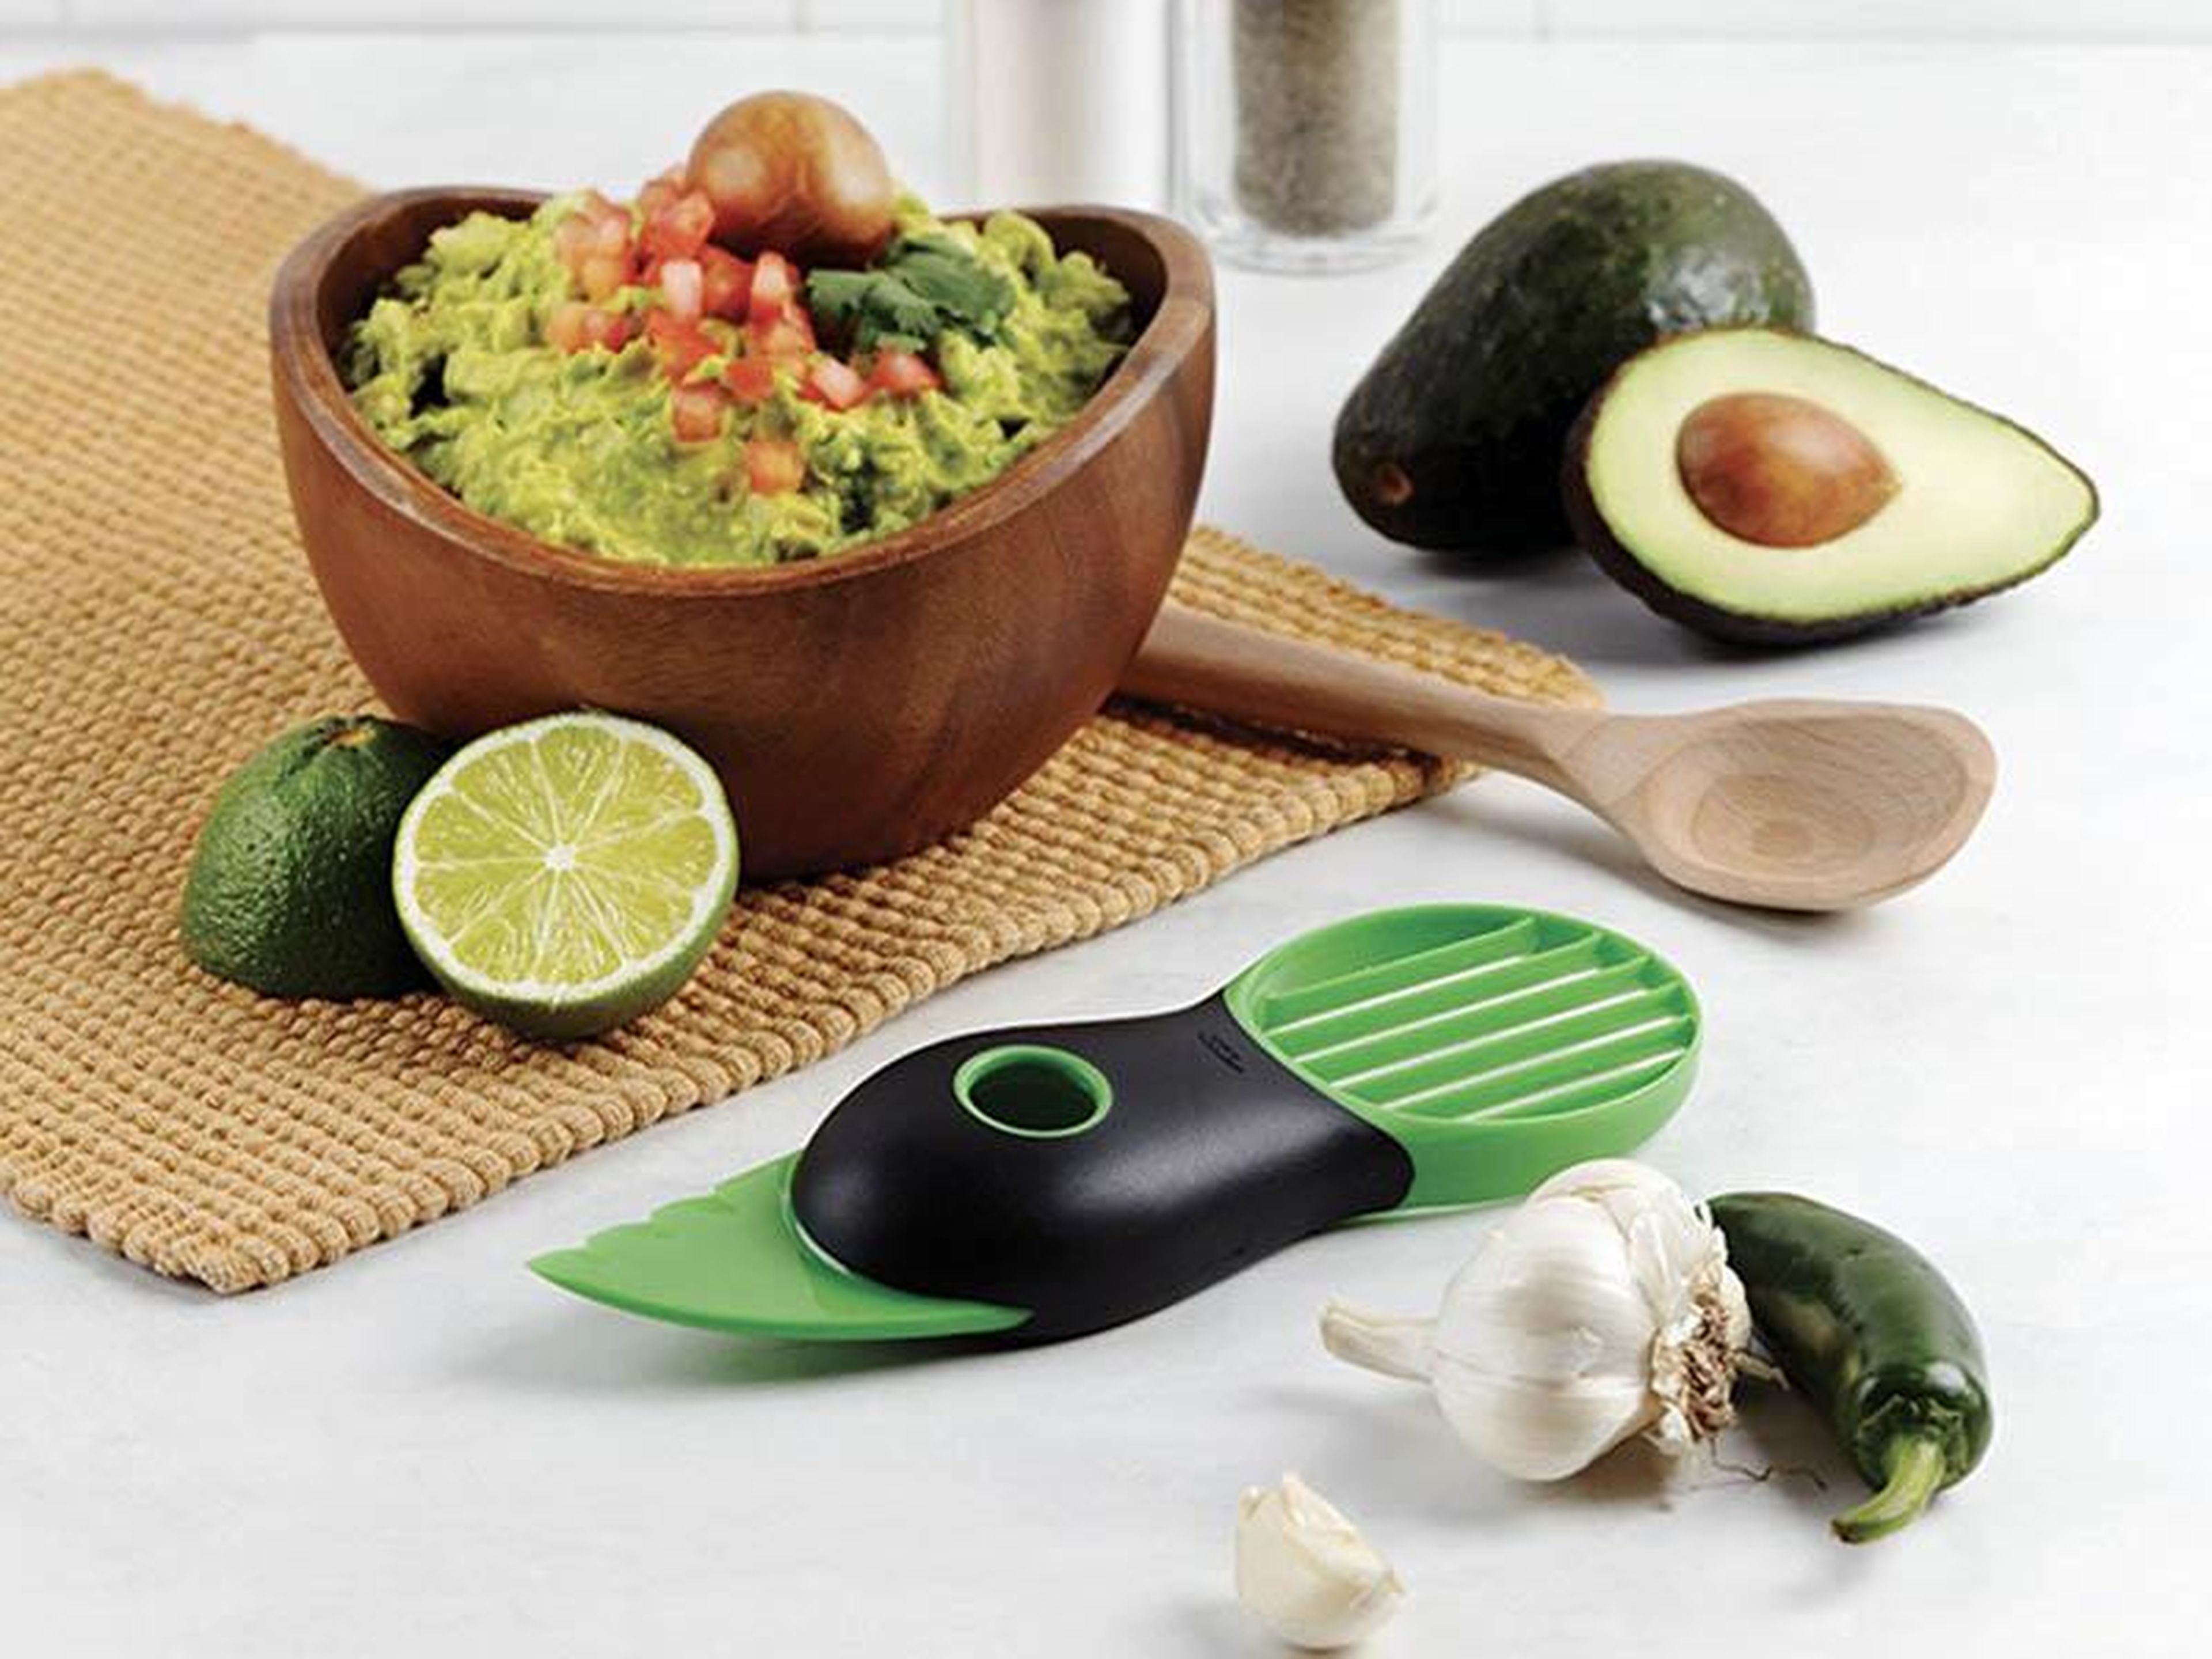 Pictured: OXO Good Grips 3-in-1 Avocado Slicer, $9.99, available at Amazon